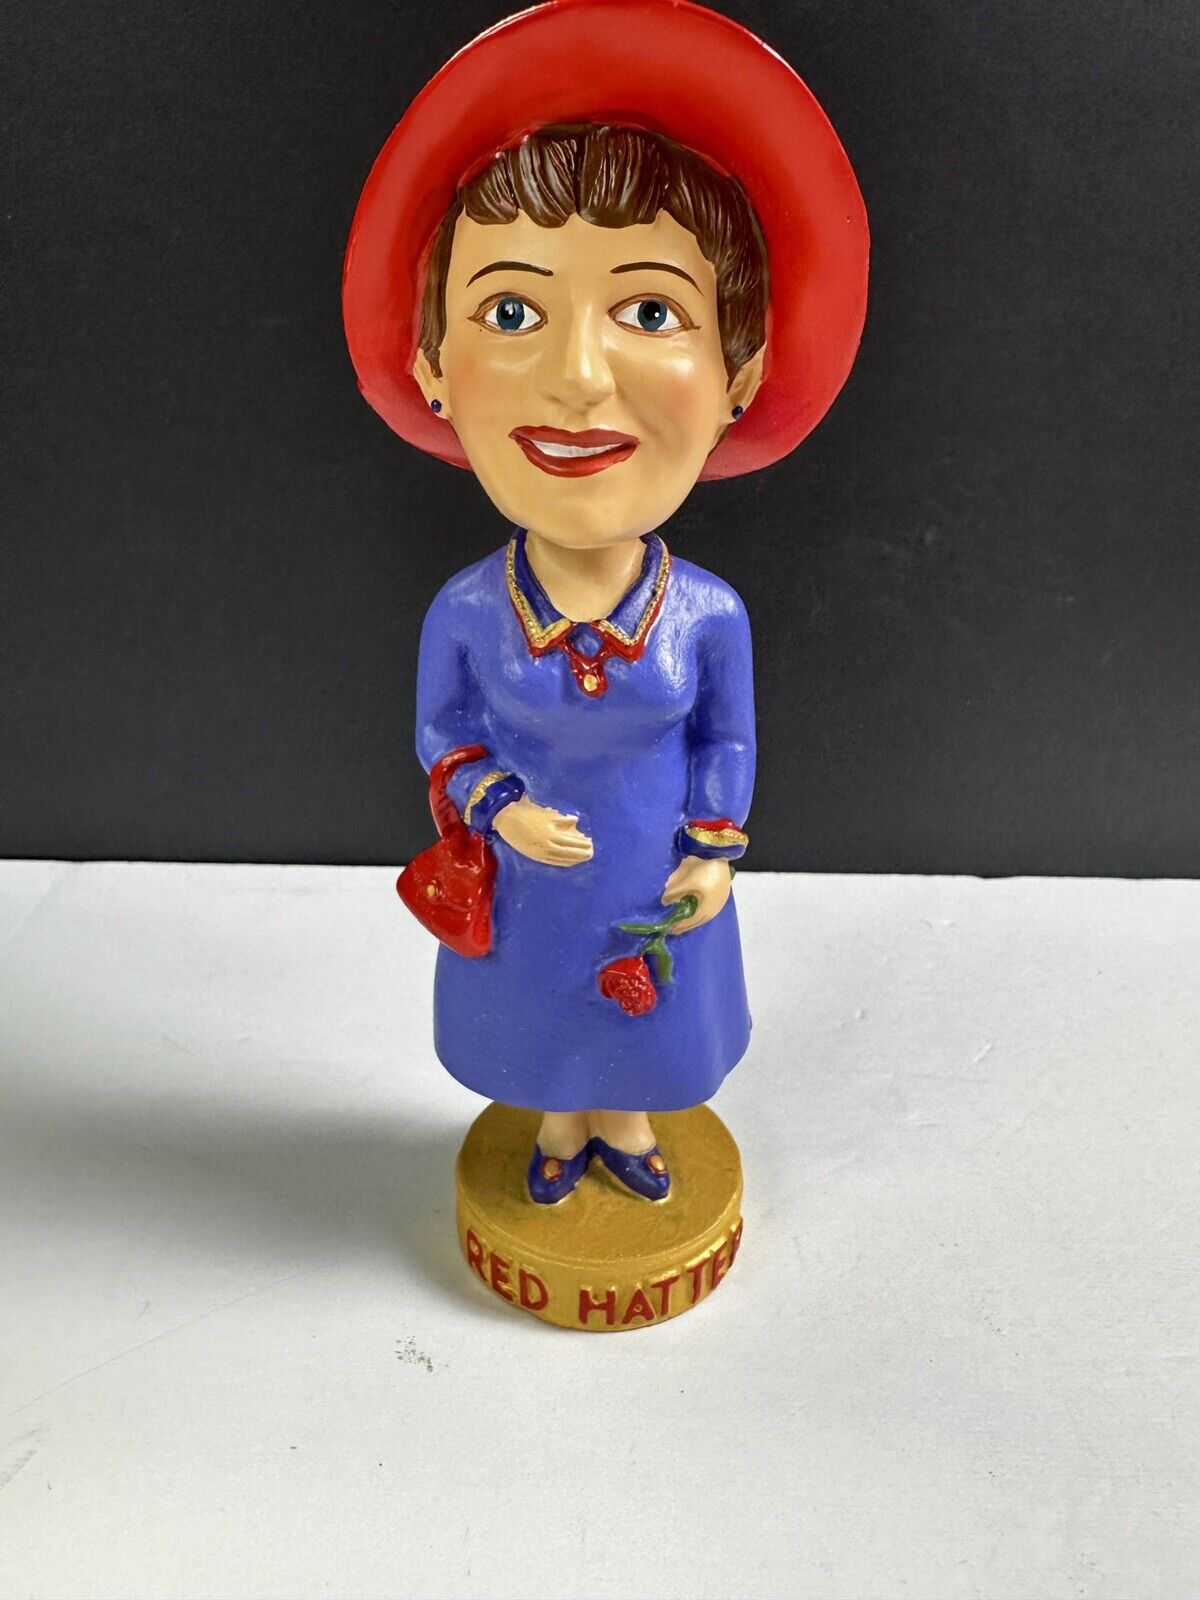 Red Hatter bobblehead in box Red Hat Ladies